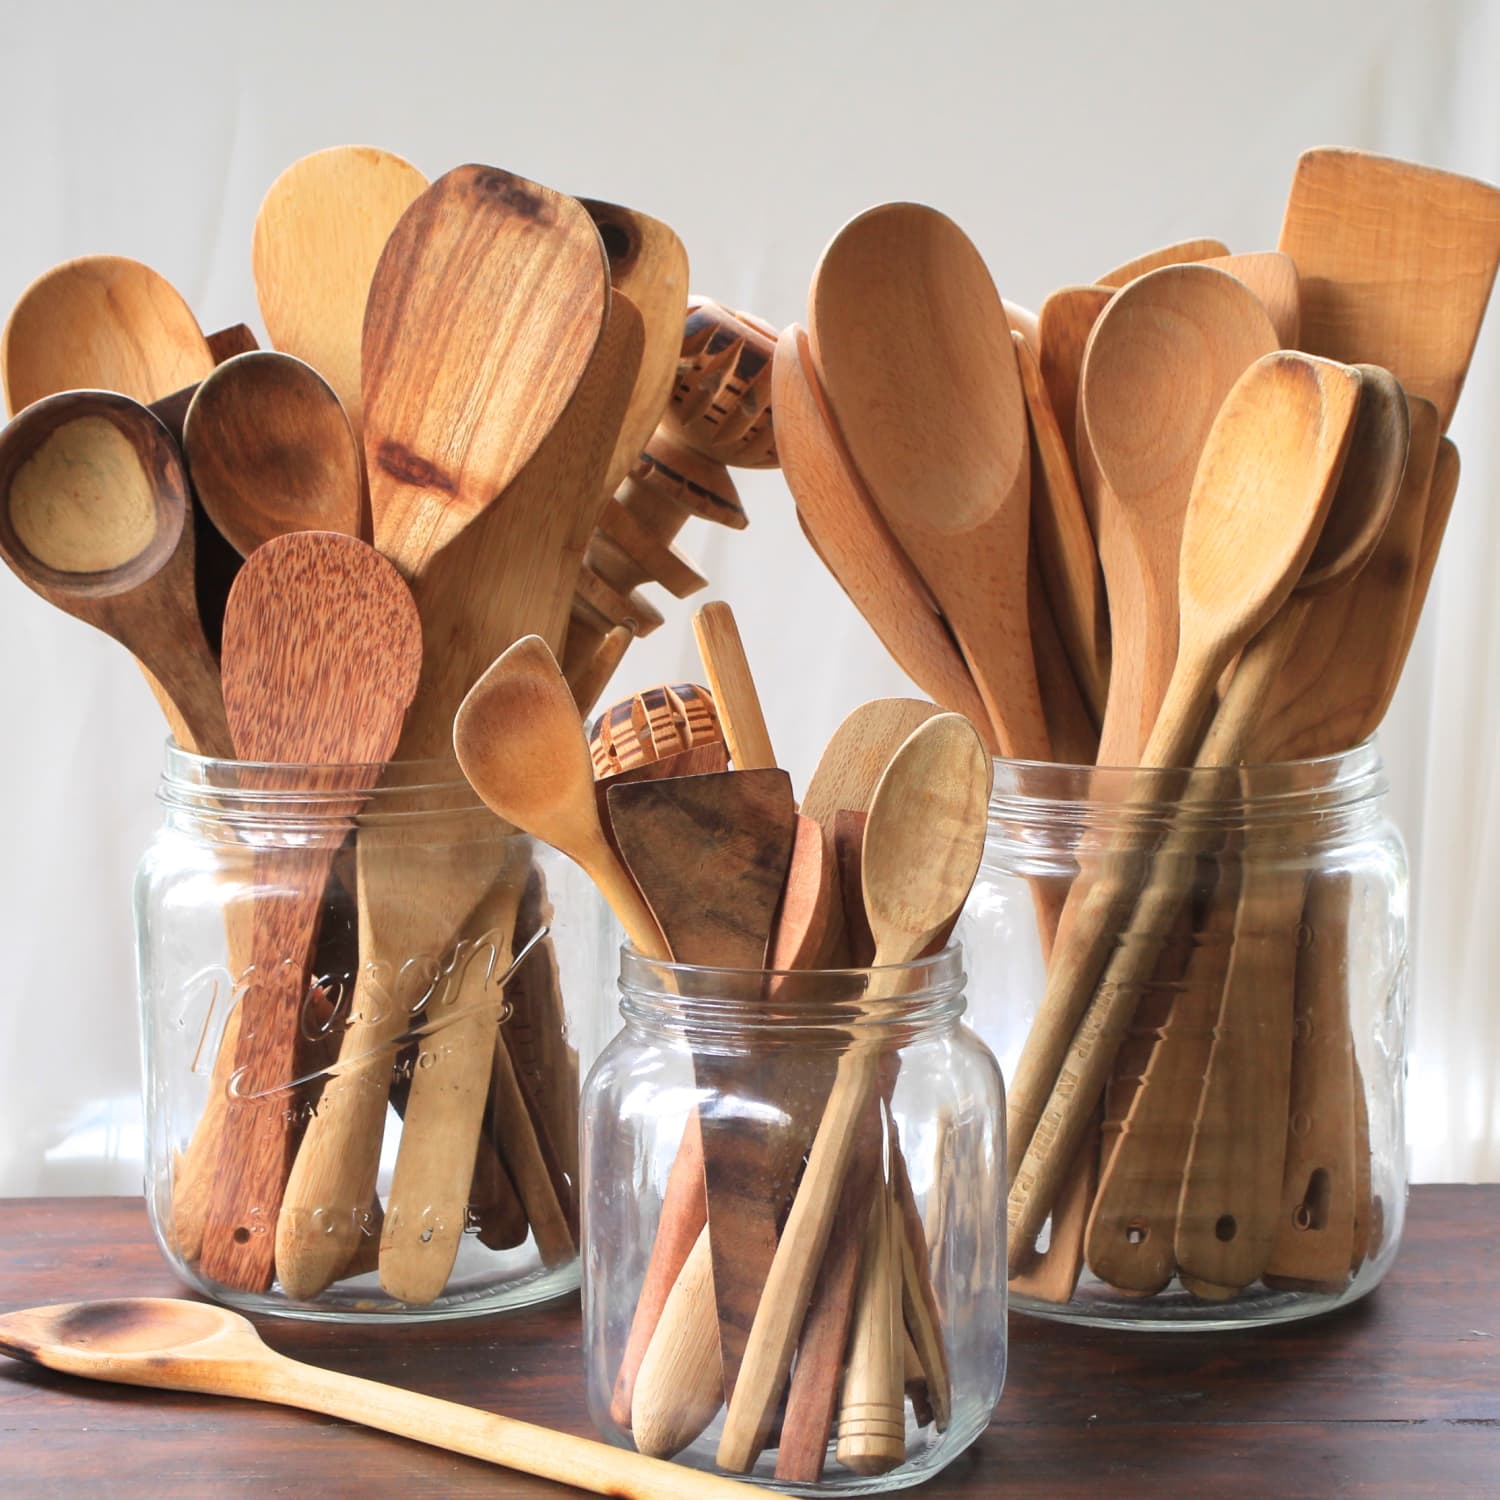 How To Clean Wooden Cutting Boards And Spoons